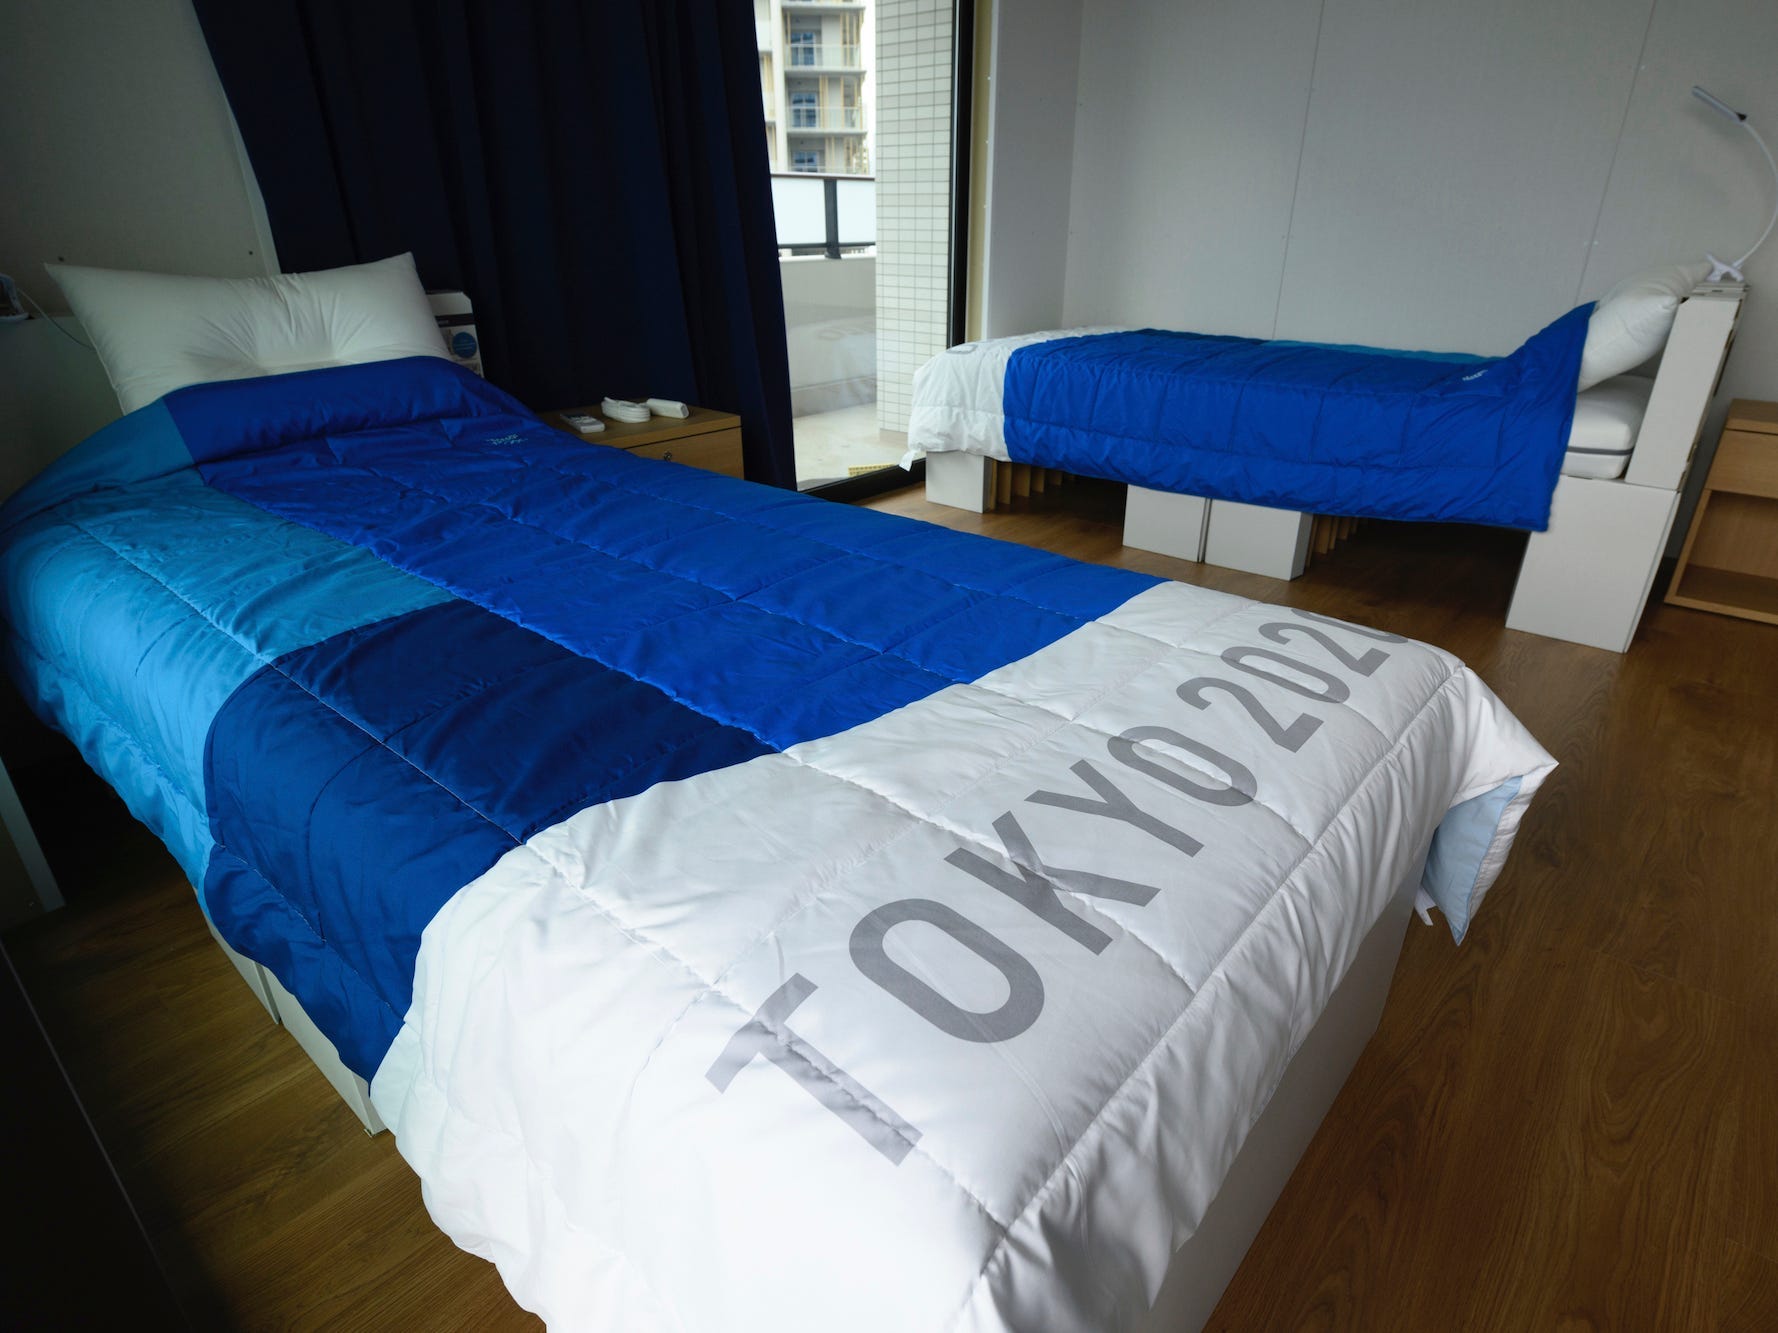 Tokyo Olympic Village beds